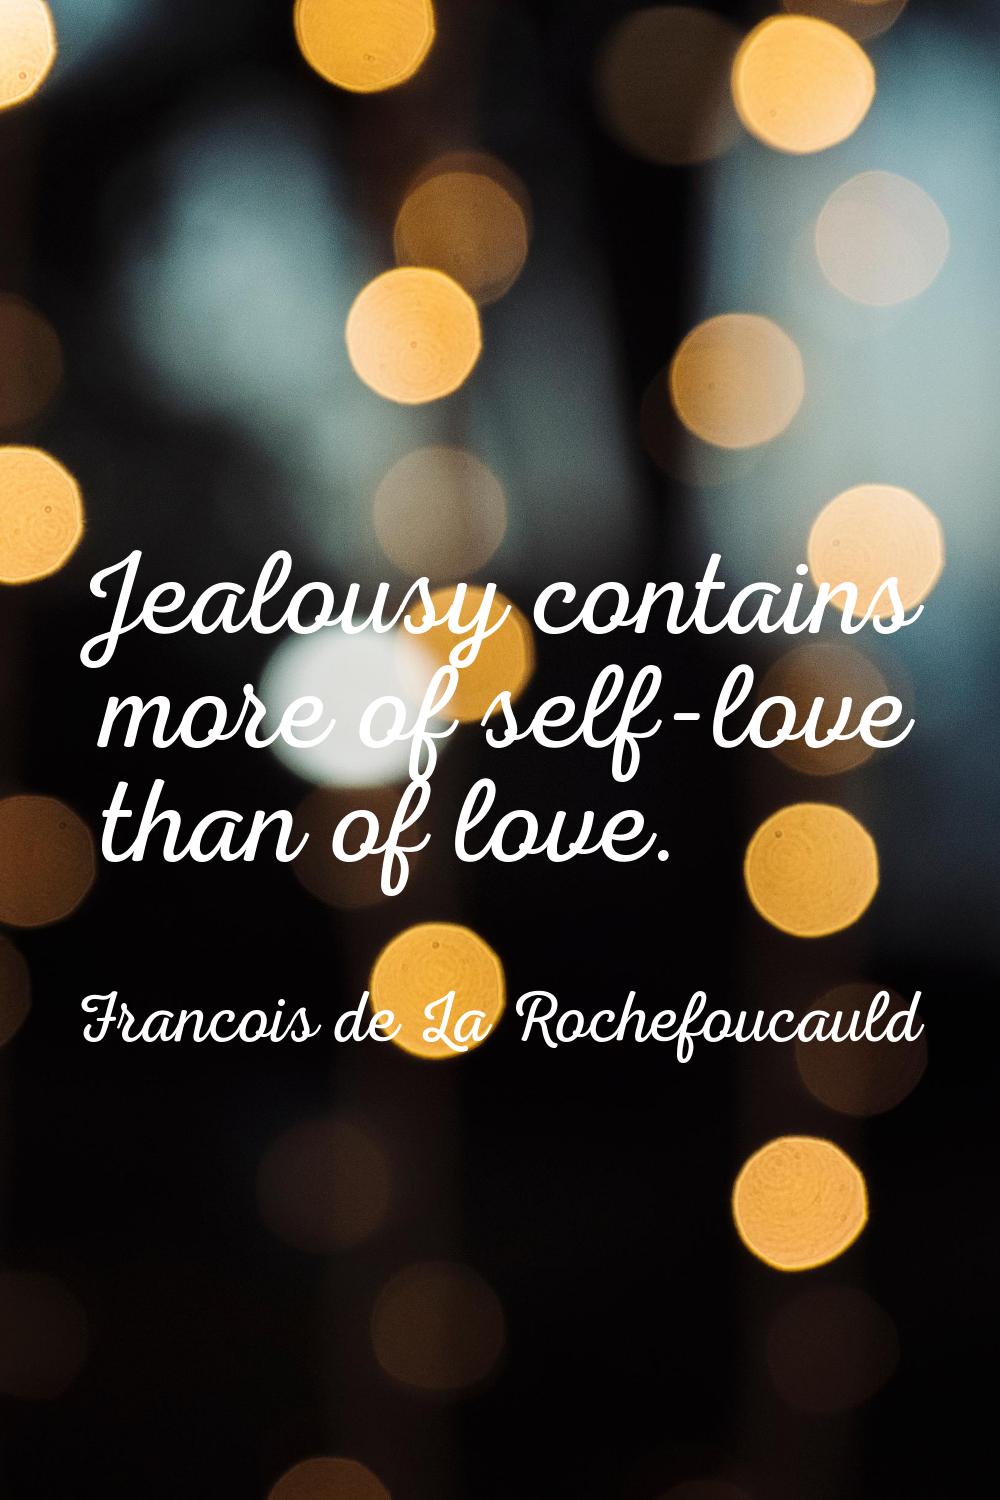 Jealousy contains more of self-love than of love.